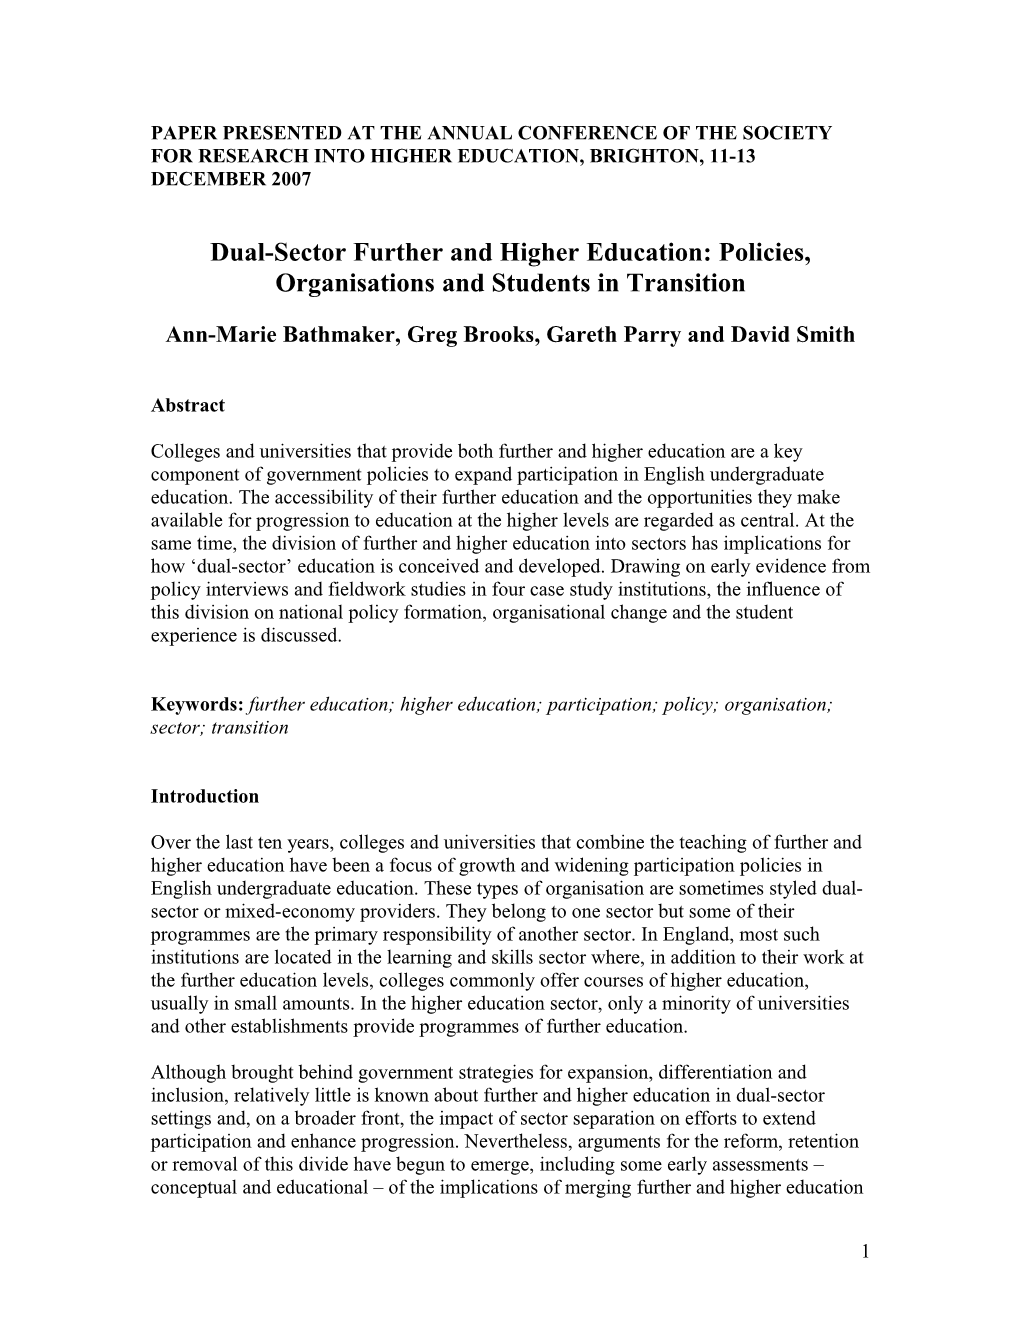 Dual-Sector Further and Higher Education: Policies, Organisations and Students in Transition